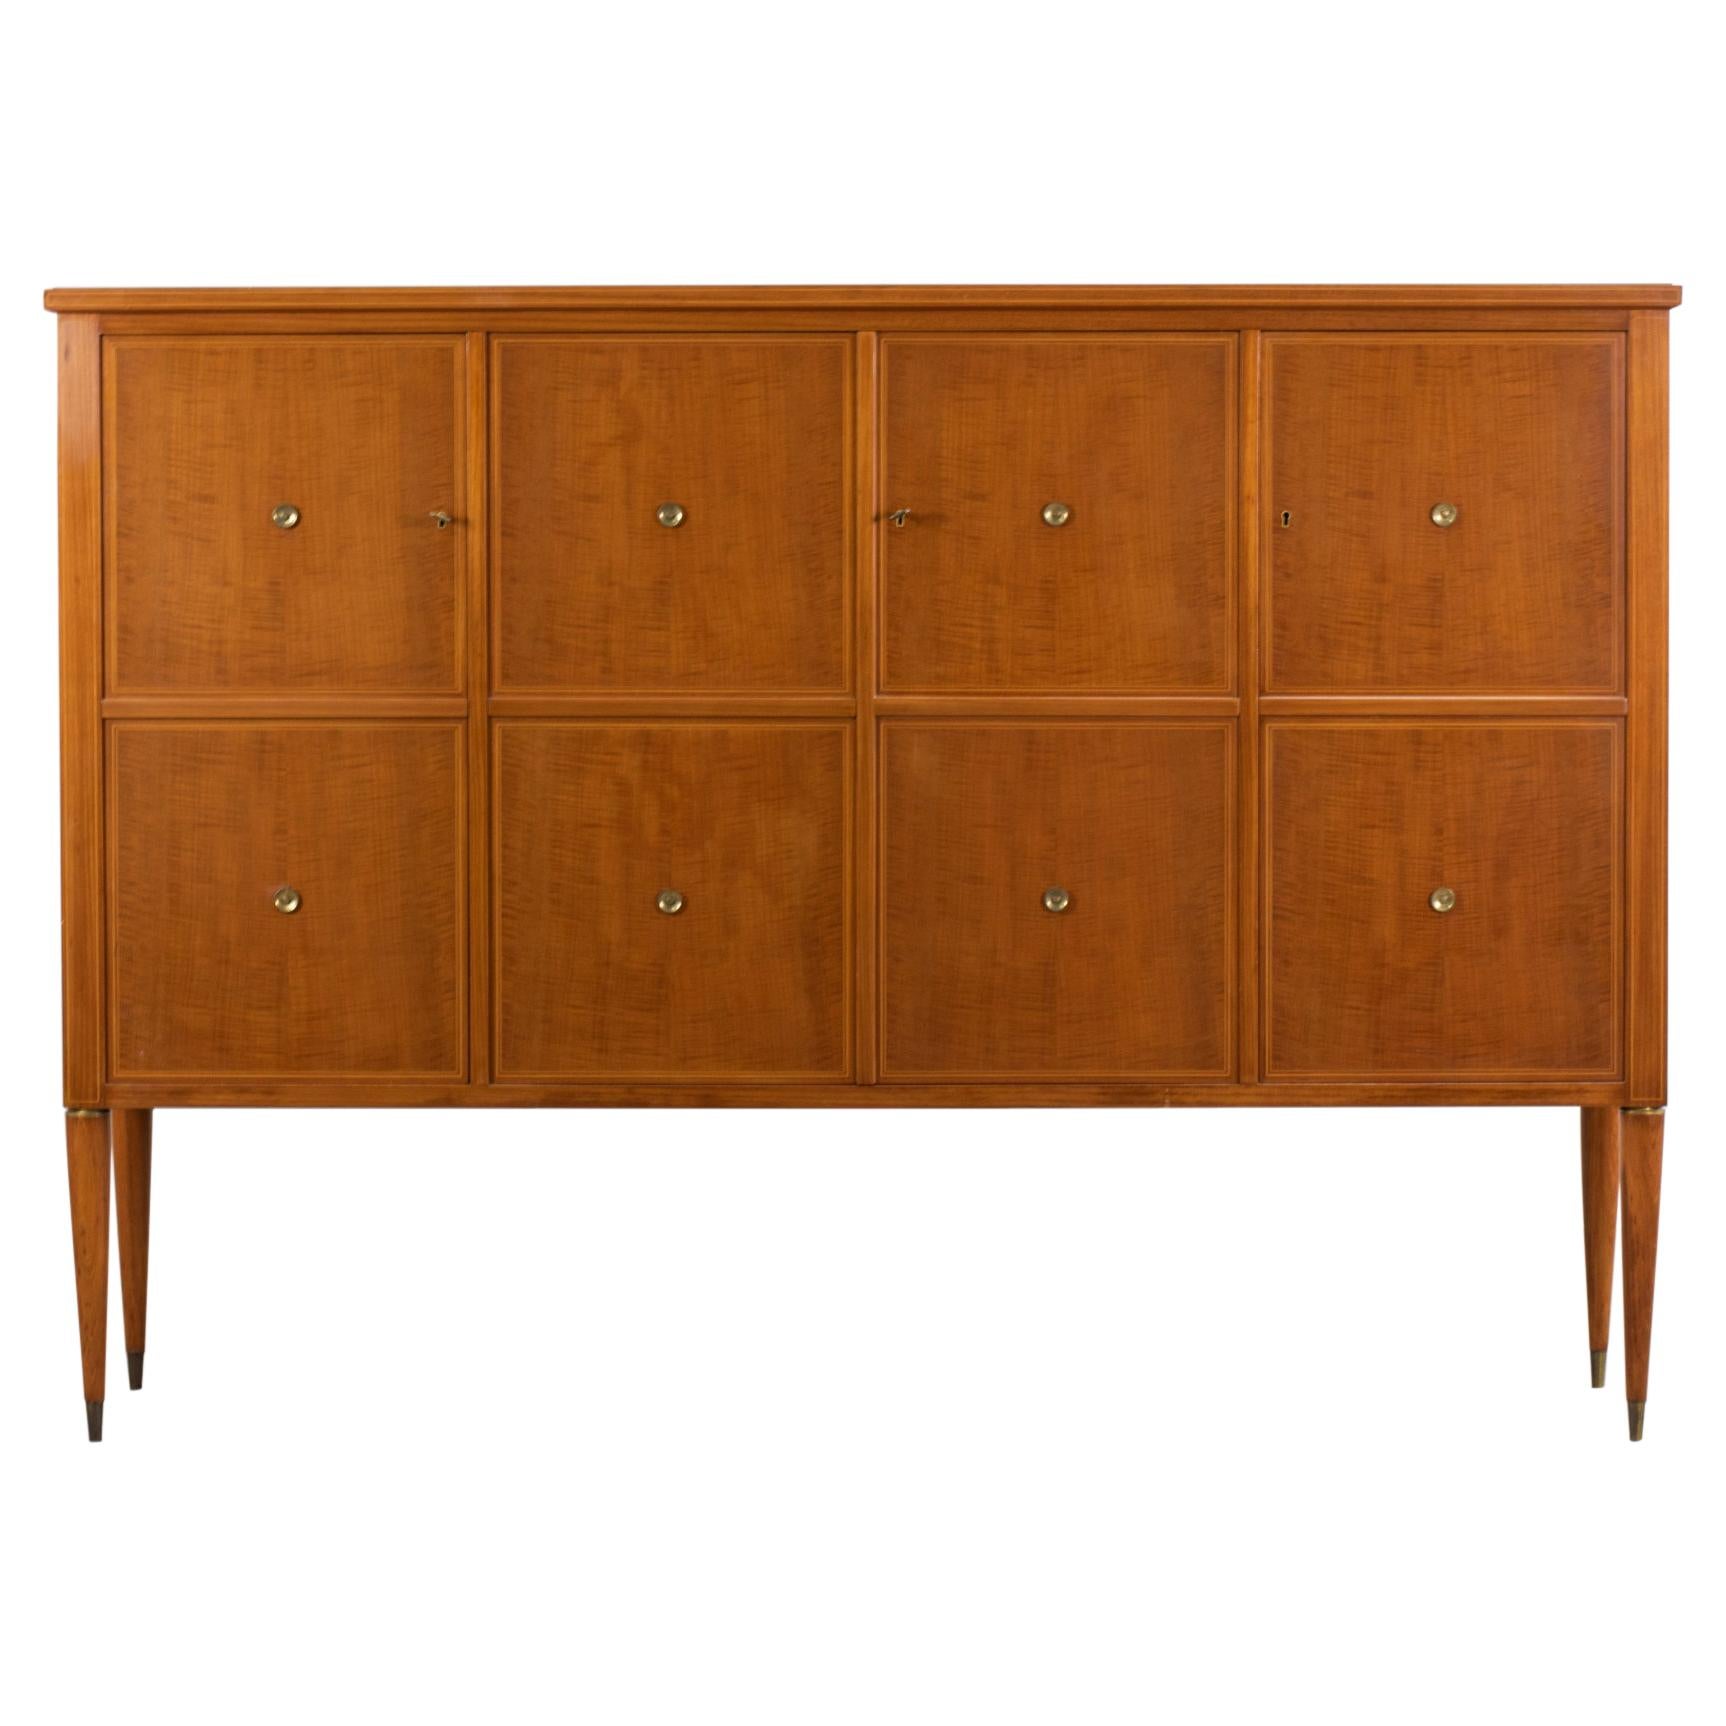 Paolo Buffa Rosewood Sideboard, Four Doors Inner Drawers and Shelves, 1940s